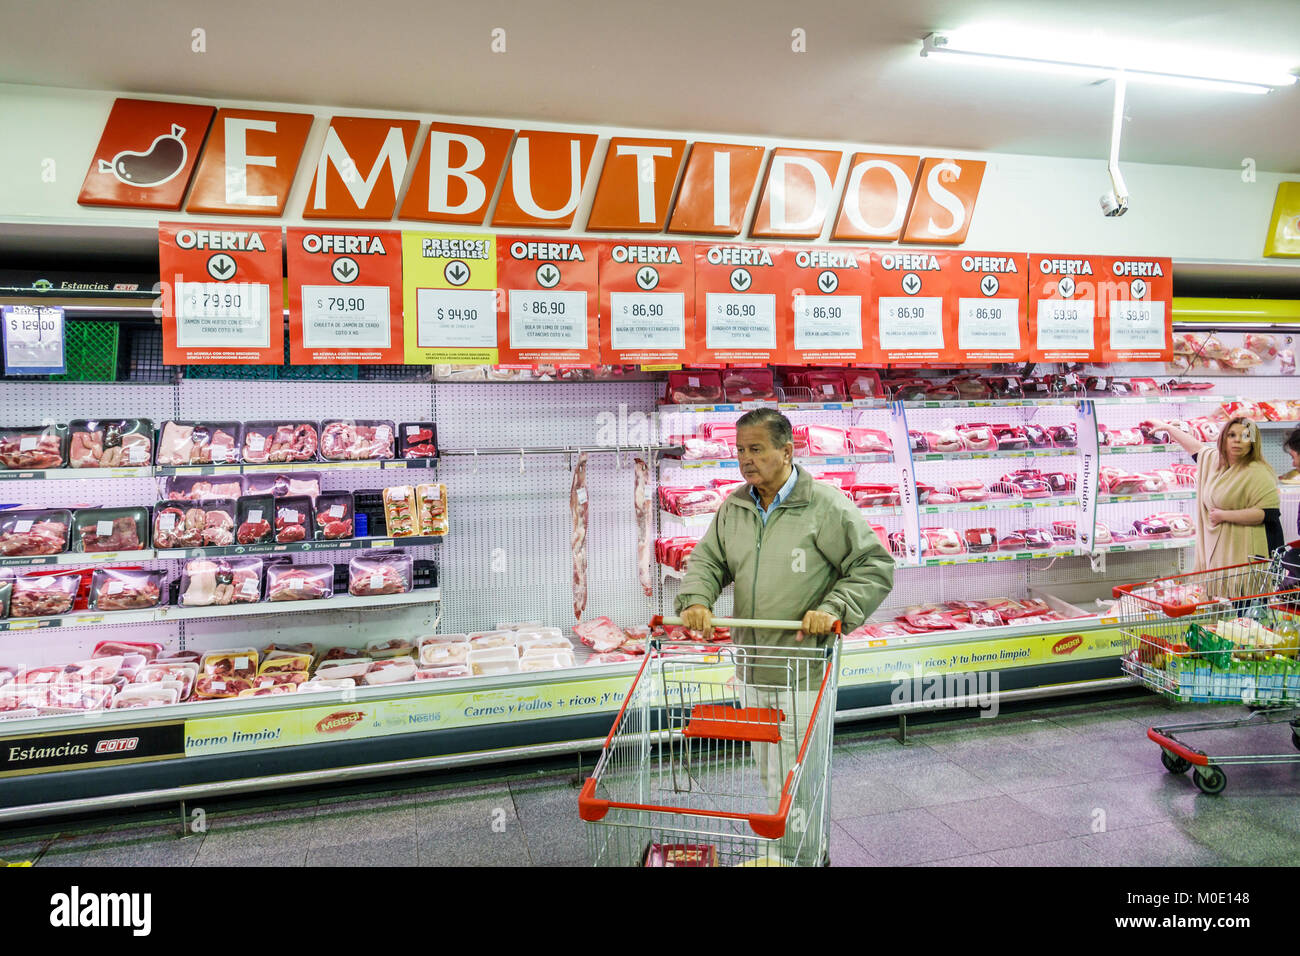 El Super: What Is So Good About This Supermarket? - Abasto